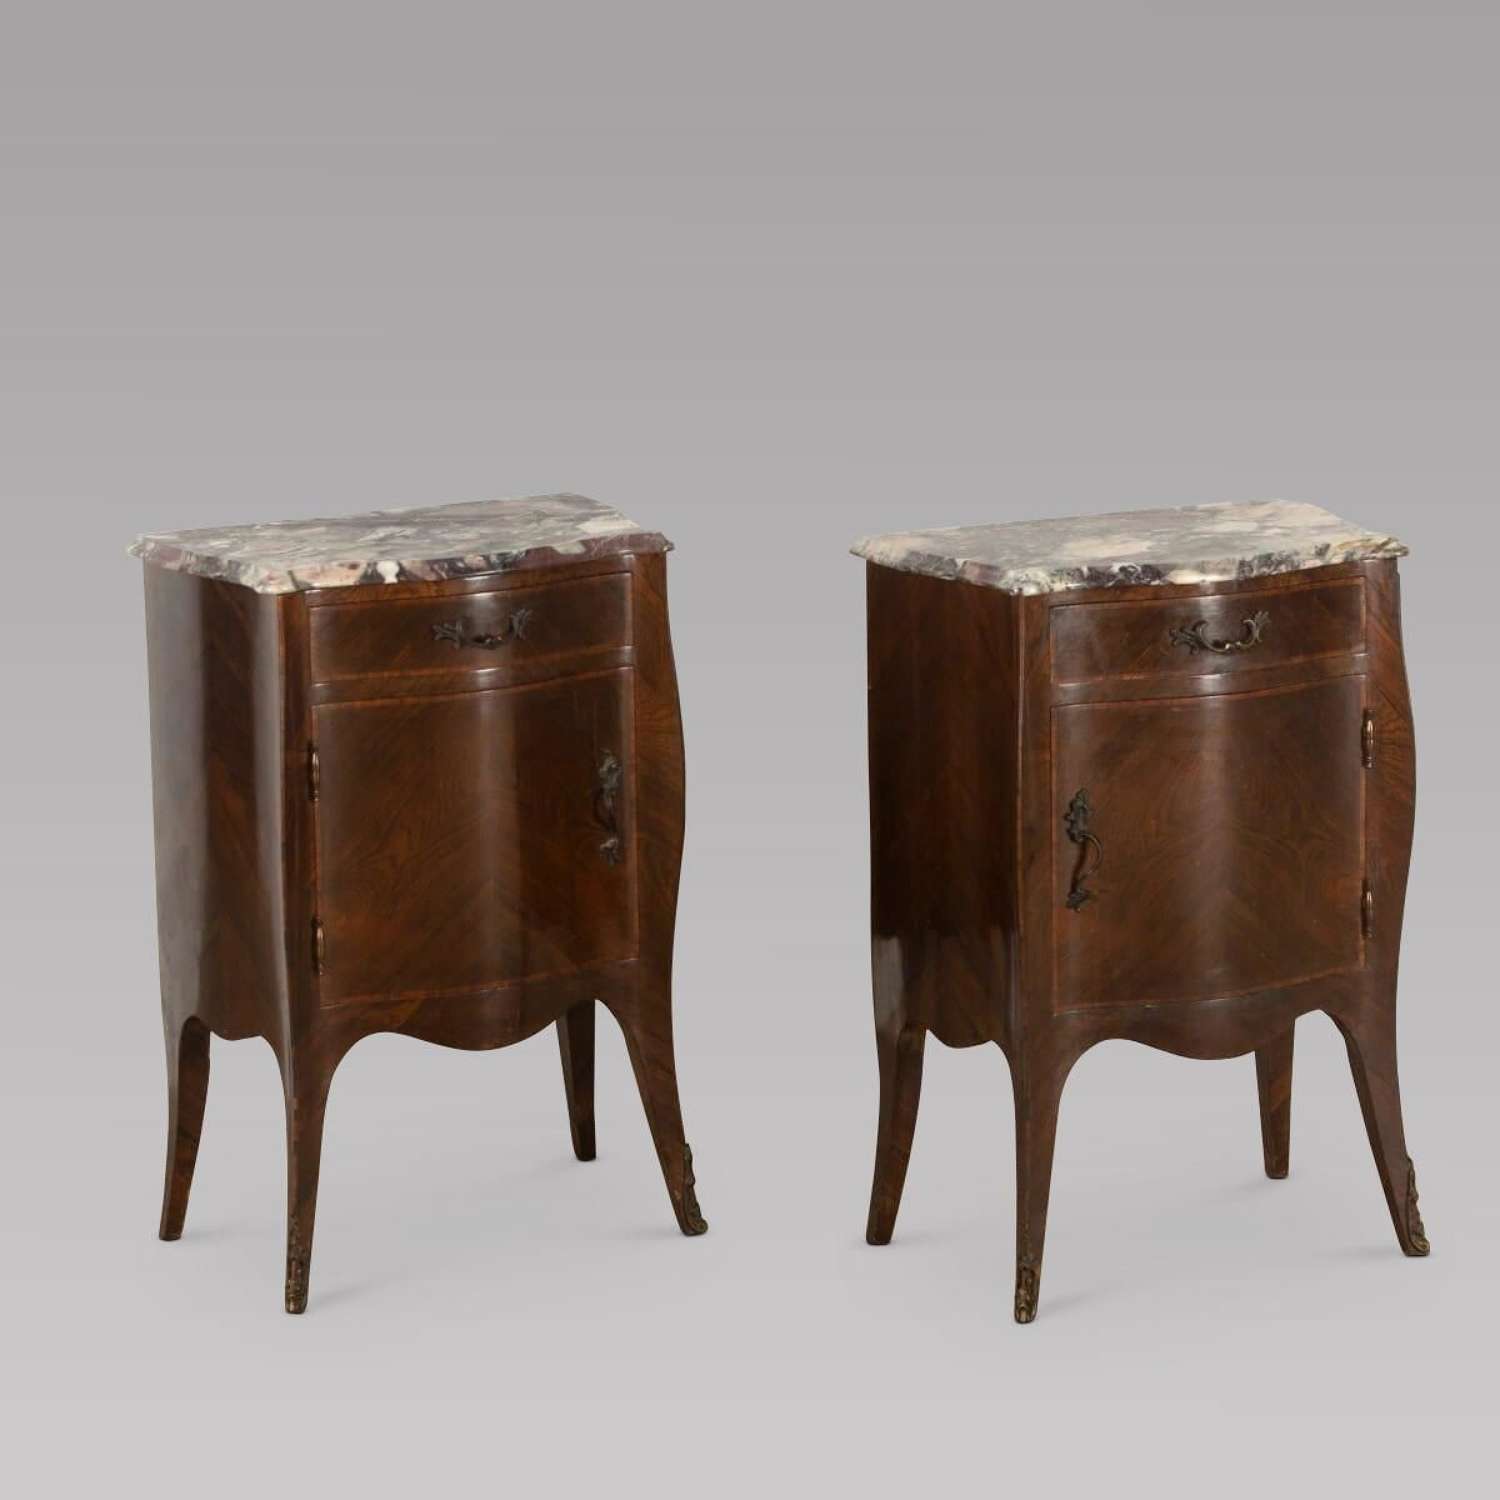 Pair of Kingwood %26 Breche Bedside Tables